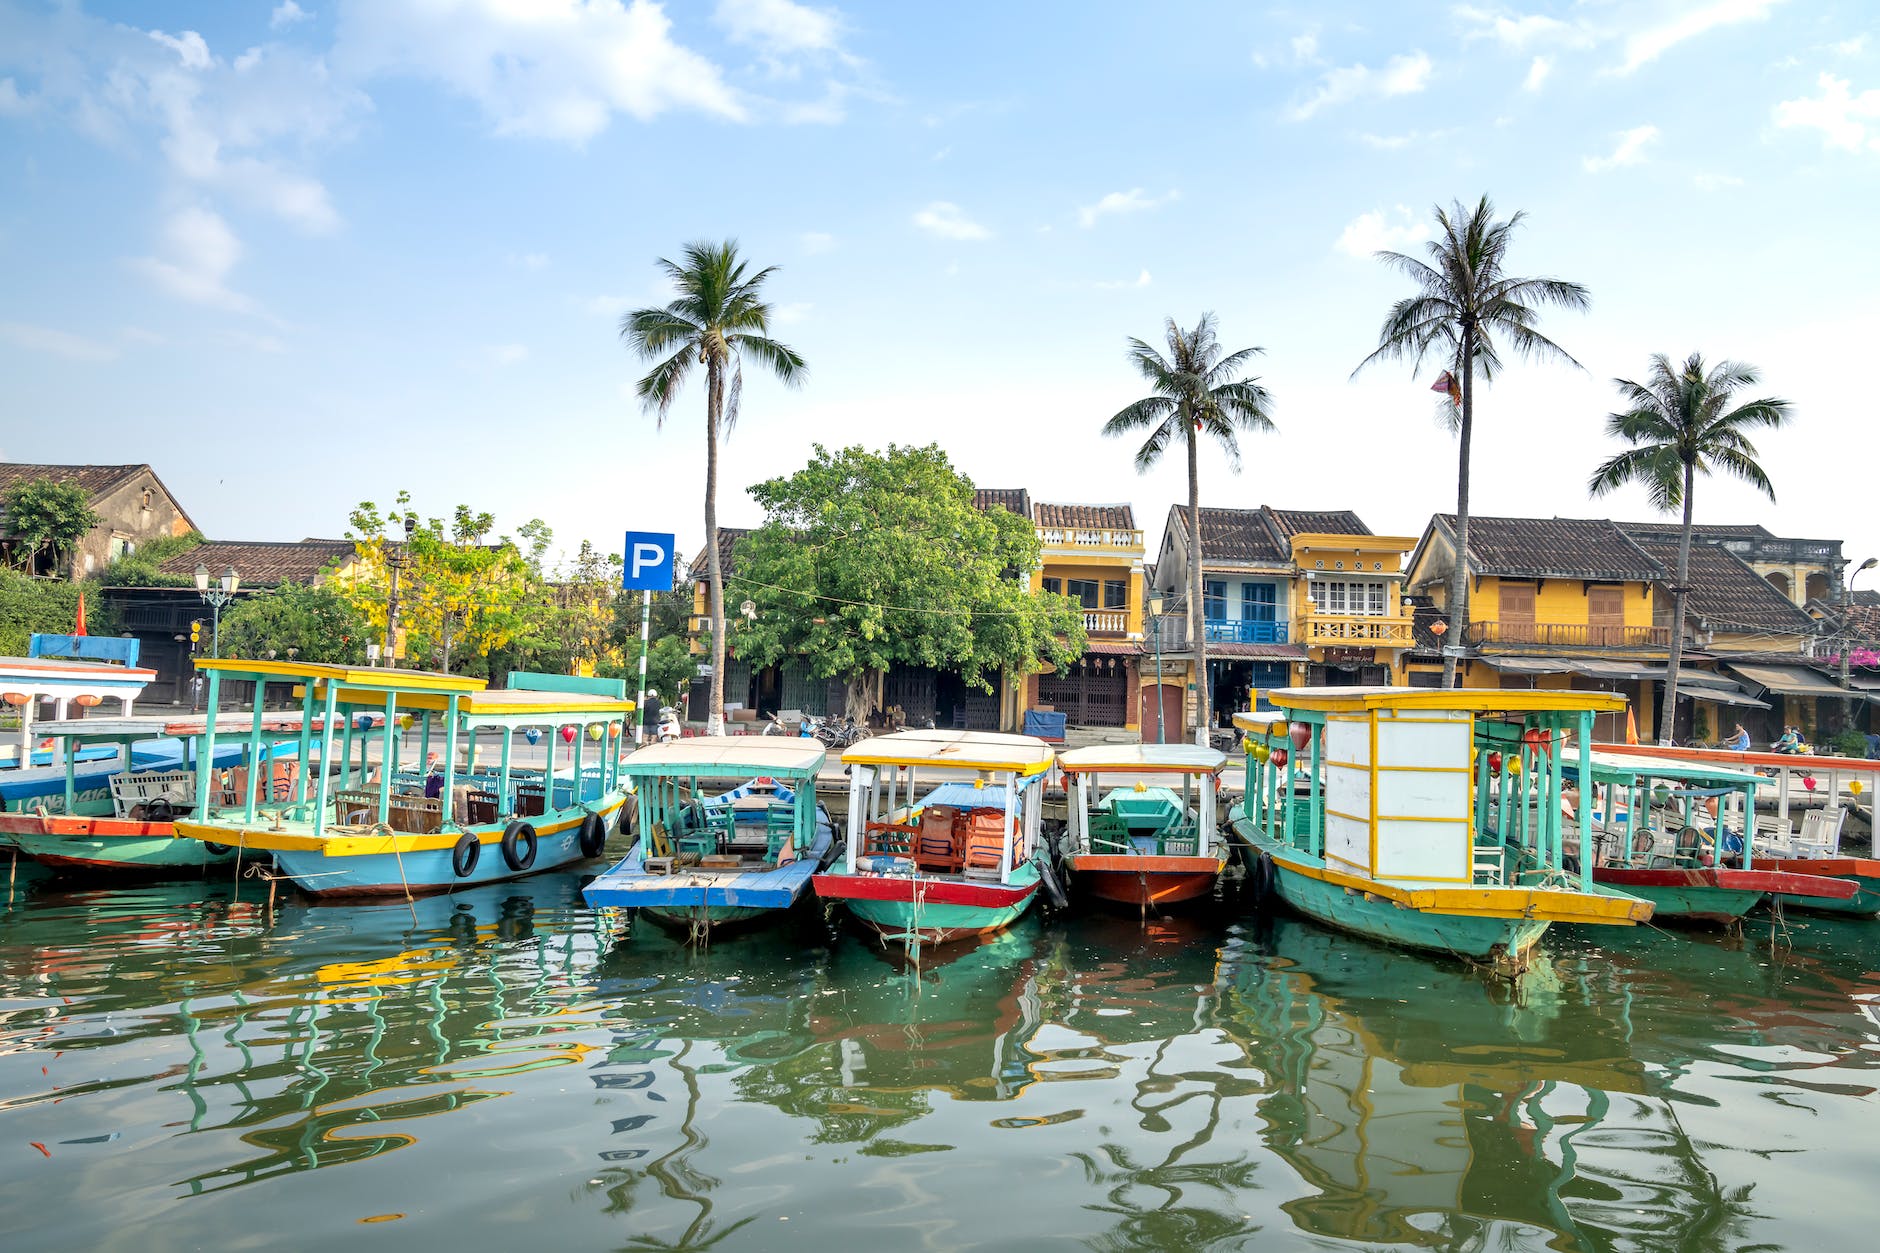 cruise boats moored on river in tropical village